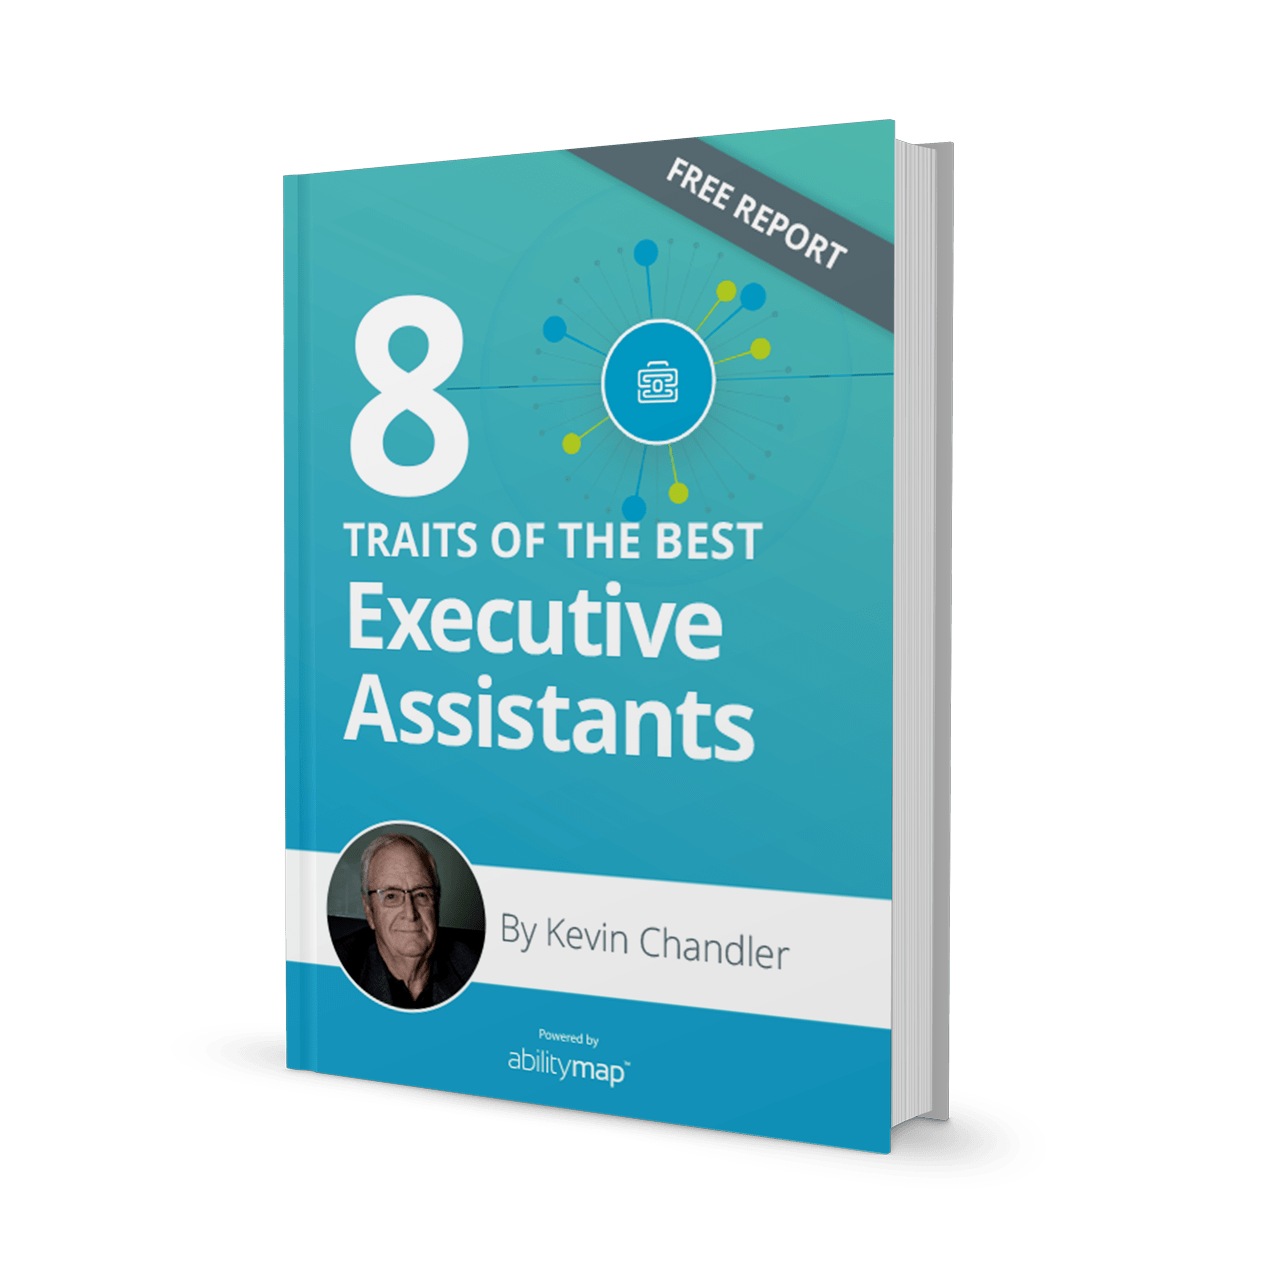 8 Traits of the best executive assistants